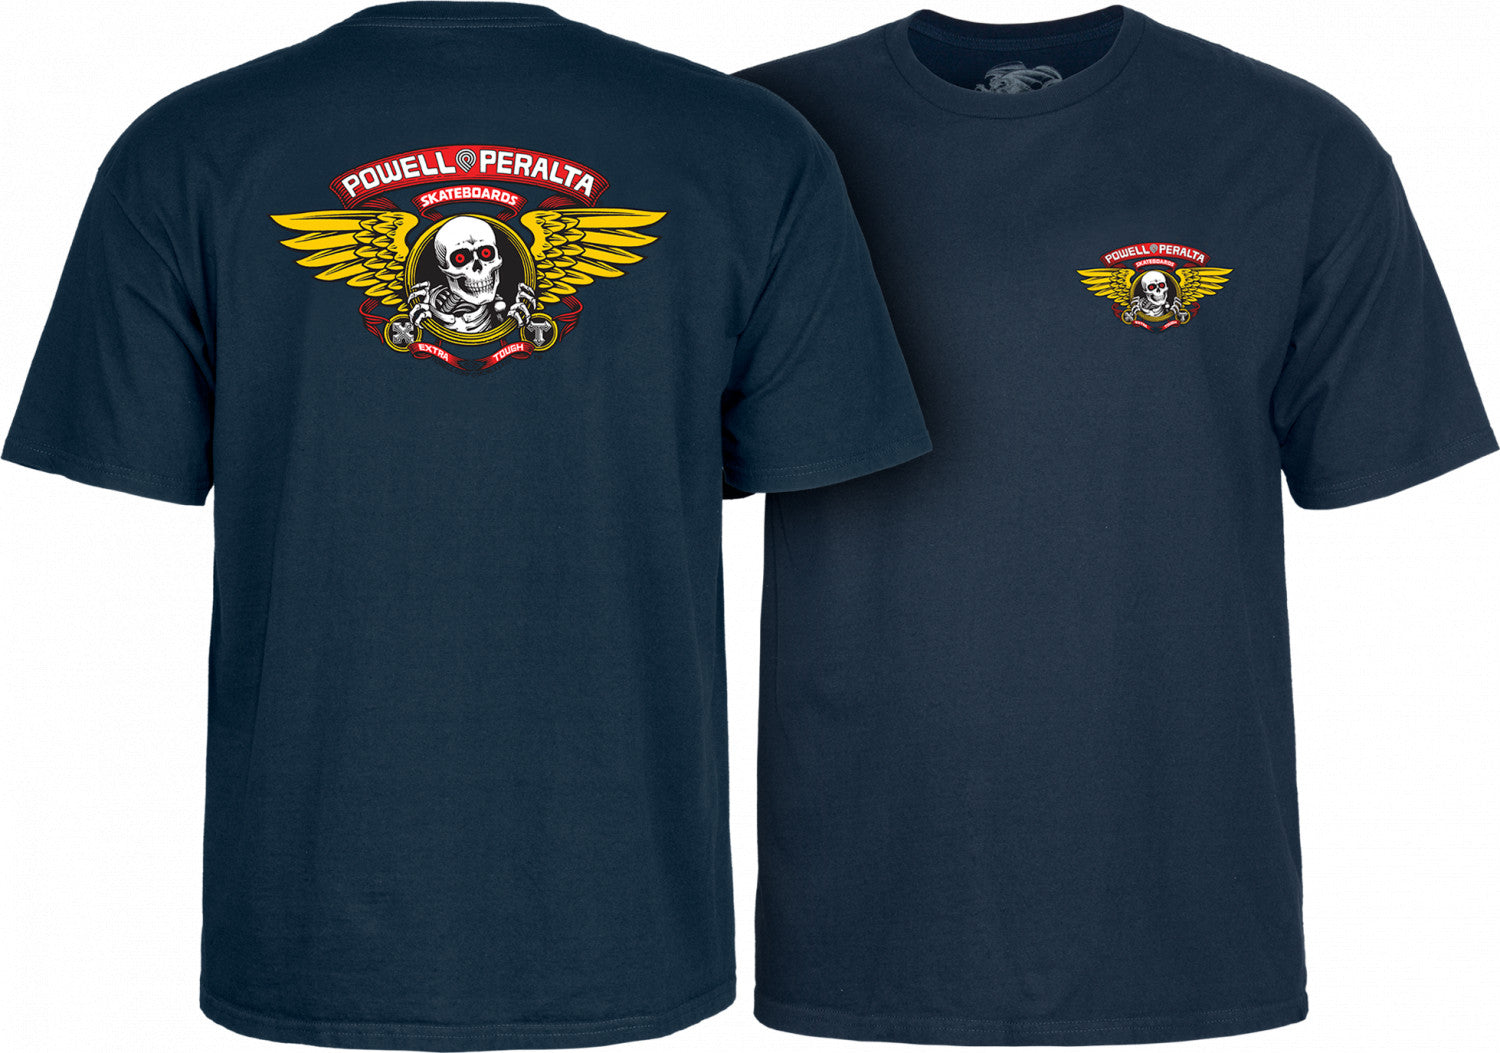 Powell Peralta Winged Ripper S/S Tee Navy L